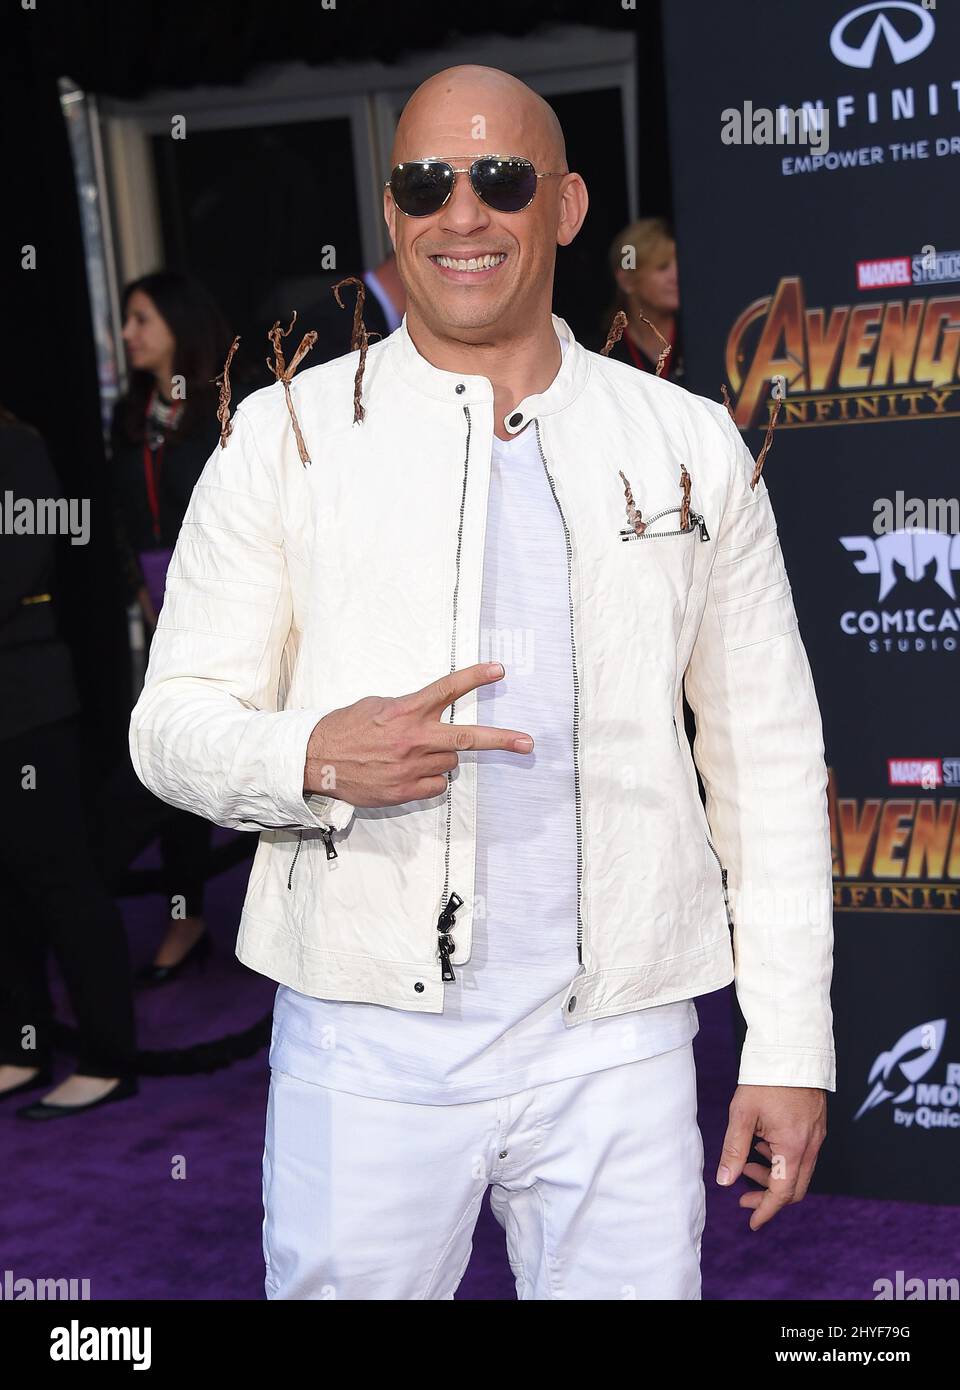 Vin Diesel attending the world premiere of Avengers: Infinity War, held at the El Capitan Theatre in Hollywood, California Stock Photo